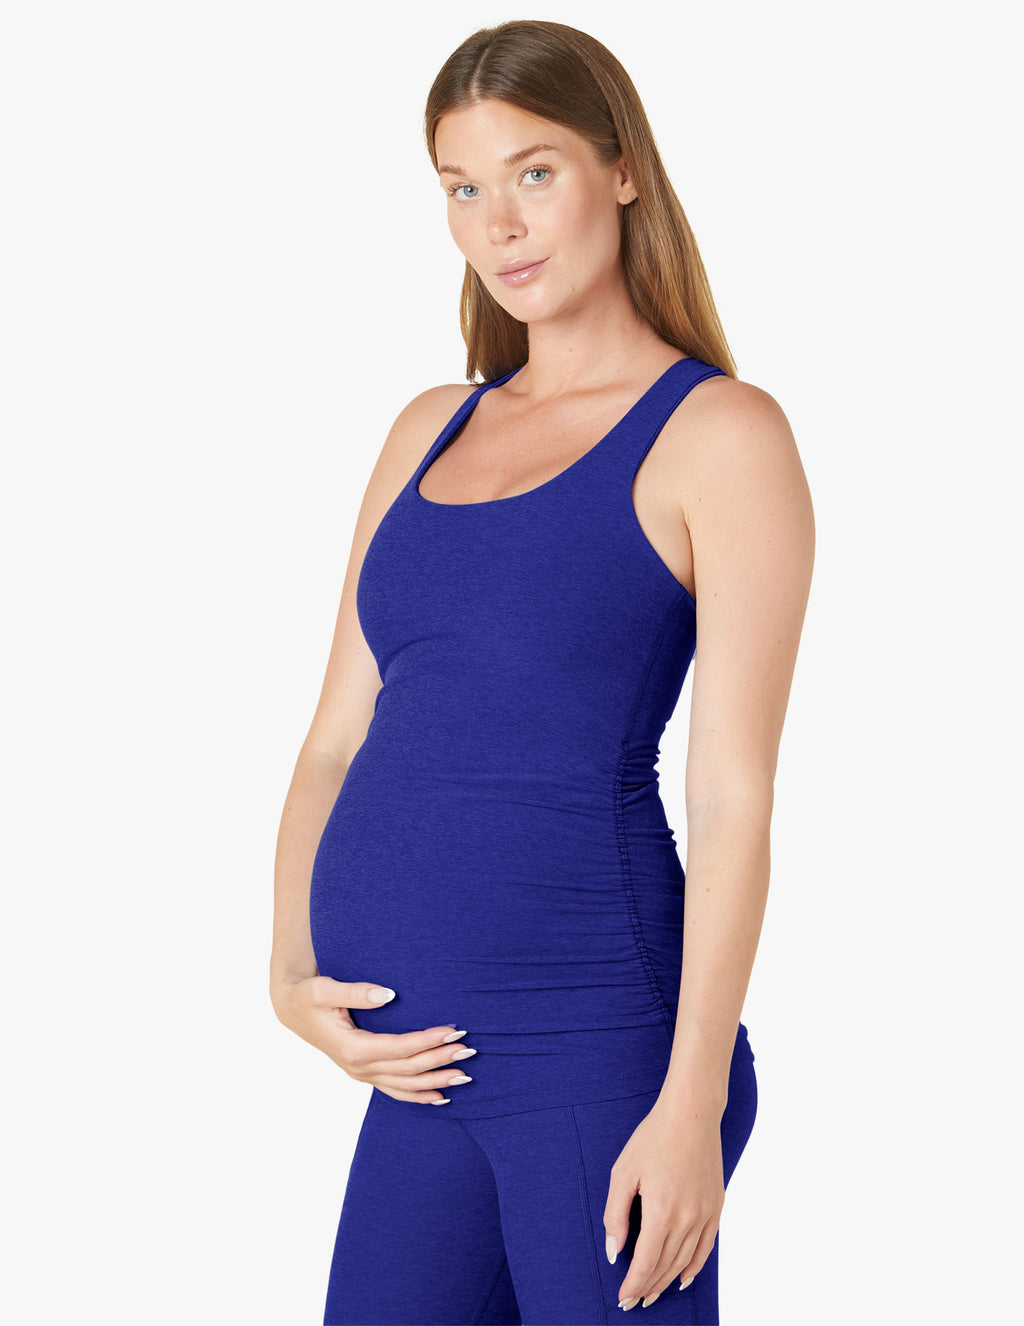 Spacedye Bases Covered Maternity Tank Featured Image